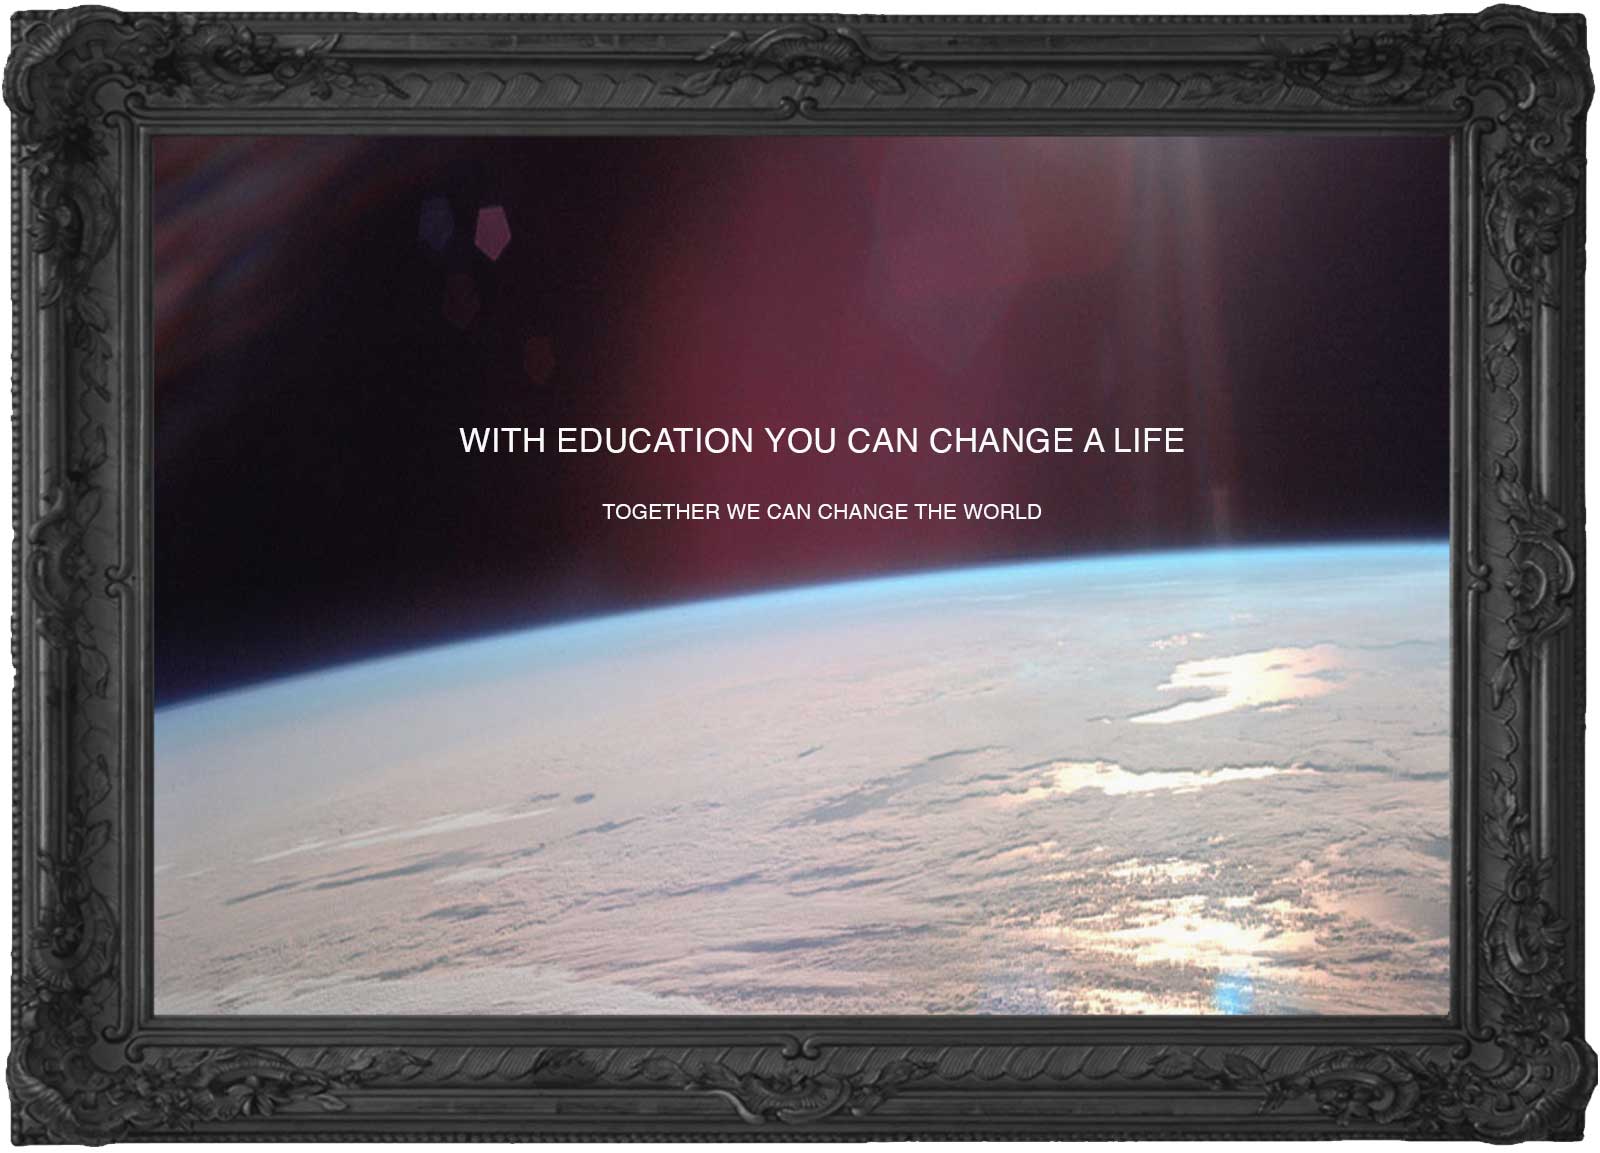 With education you can change a life